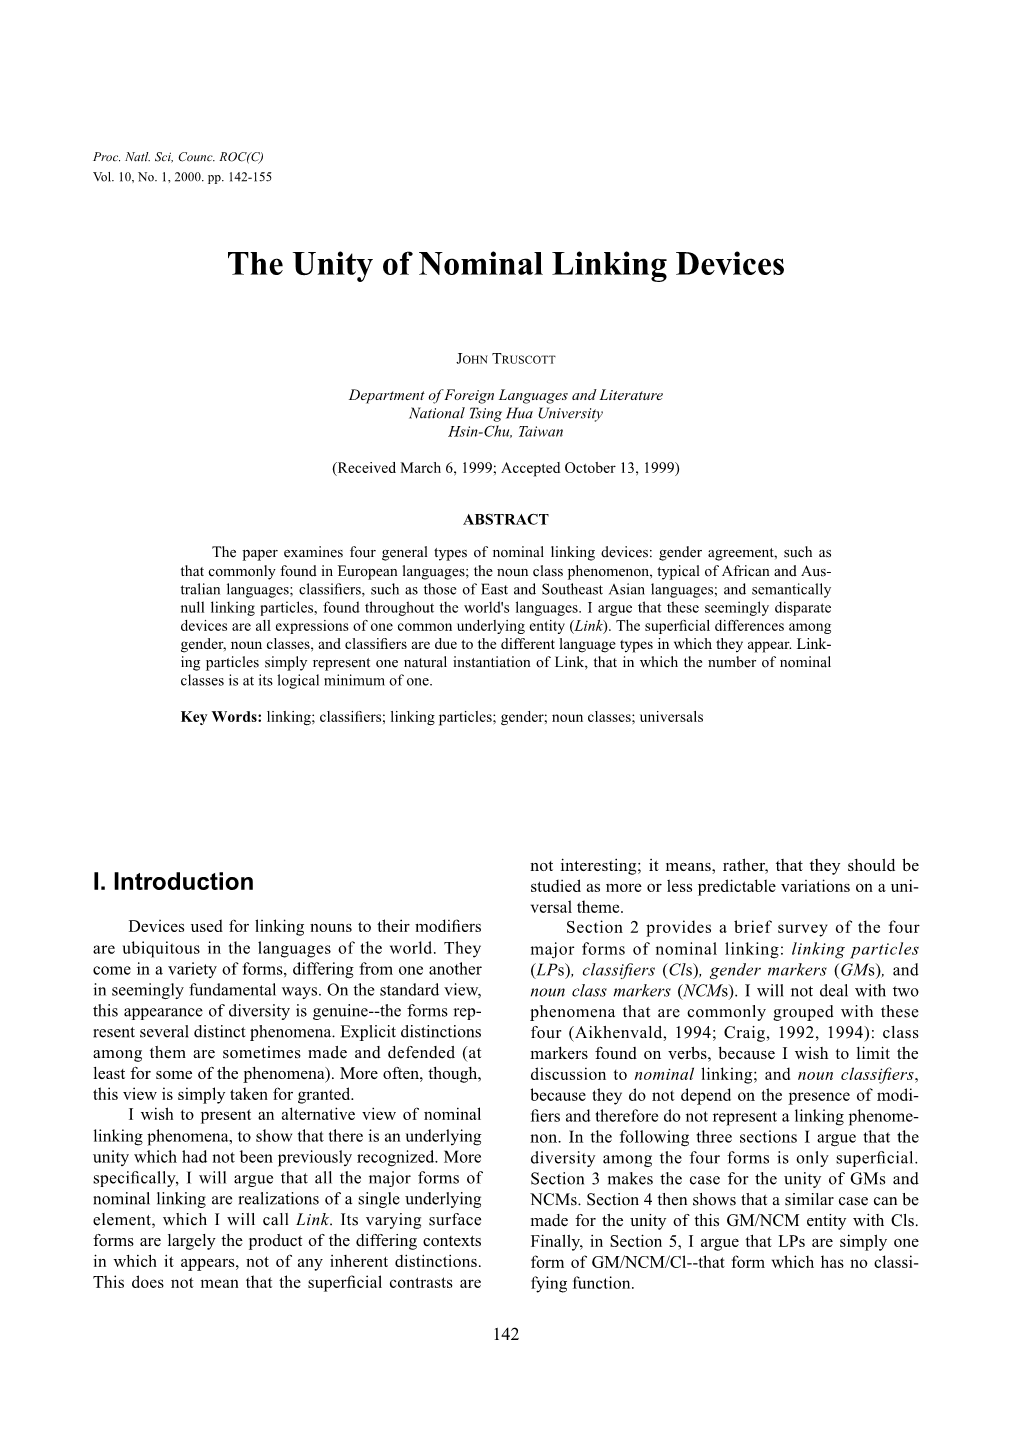 The Unity of Nominal Linking Devices